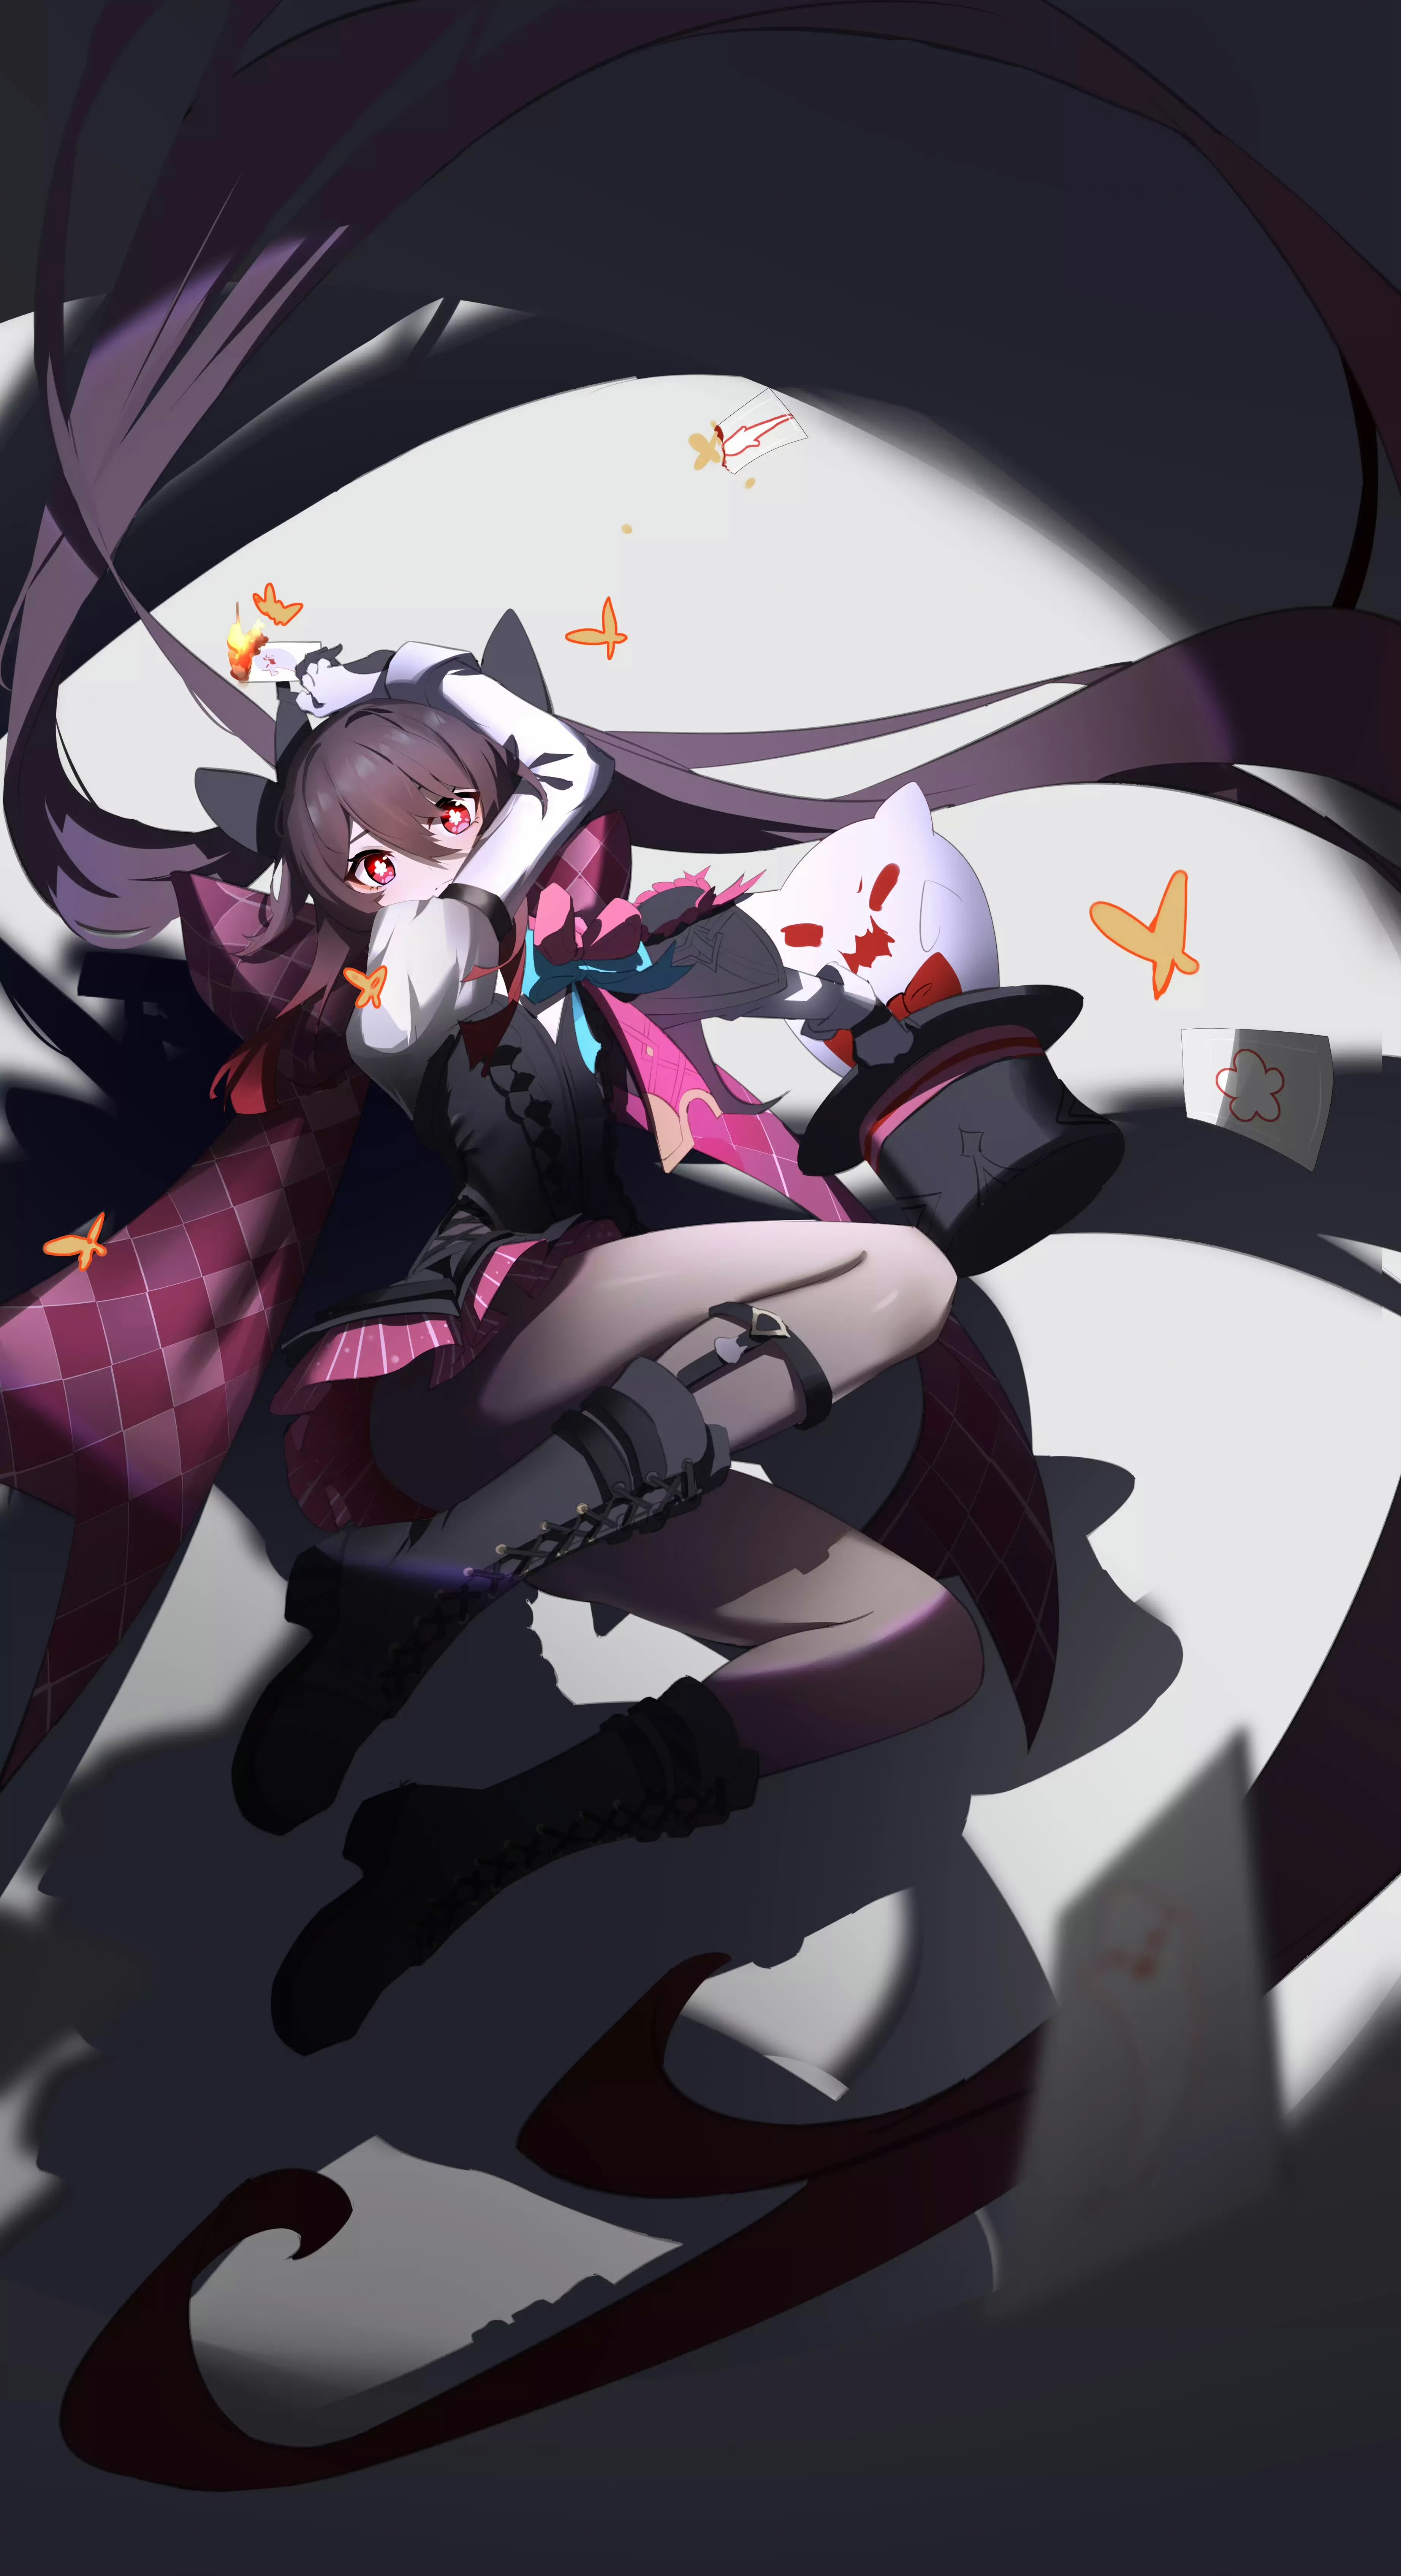 Anime 3687x6779 anime girls anime Hu Tao (Genshin Impact) Genshin Impact long hair twintails ghost hat butterfly insect skirt looking at viewer cards portrait display red eyes fire bow tie boots Lynette (Genshin Impact)